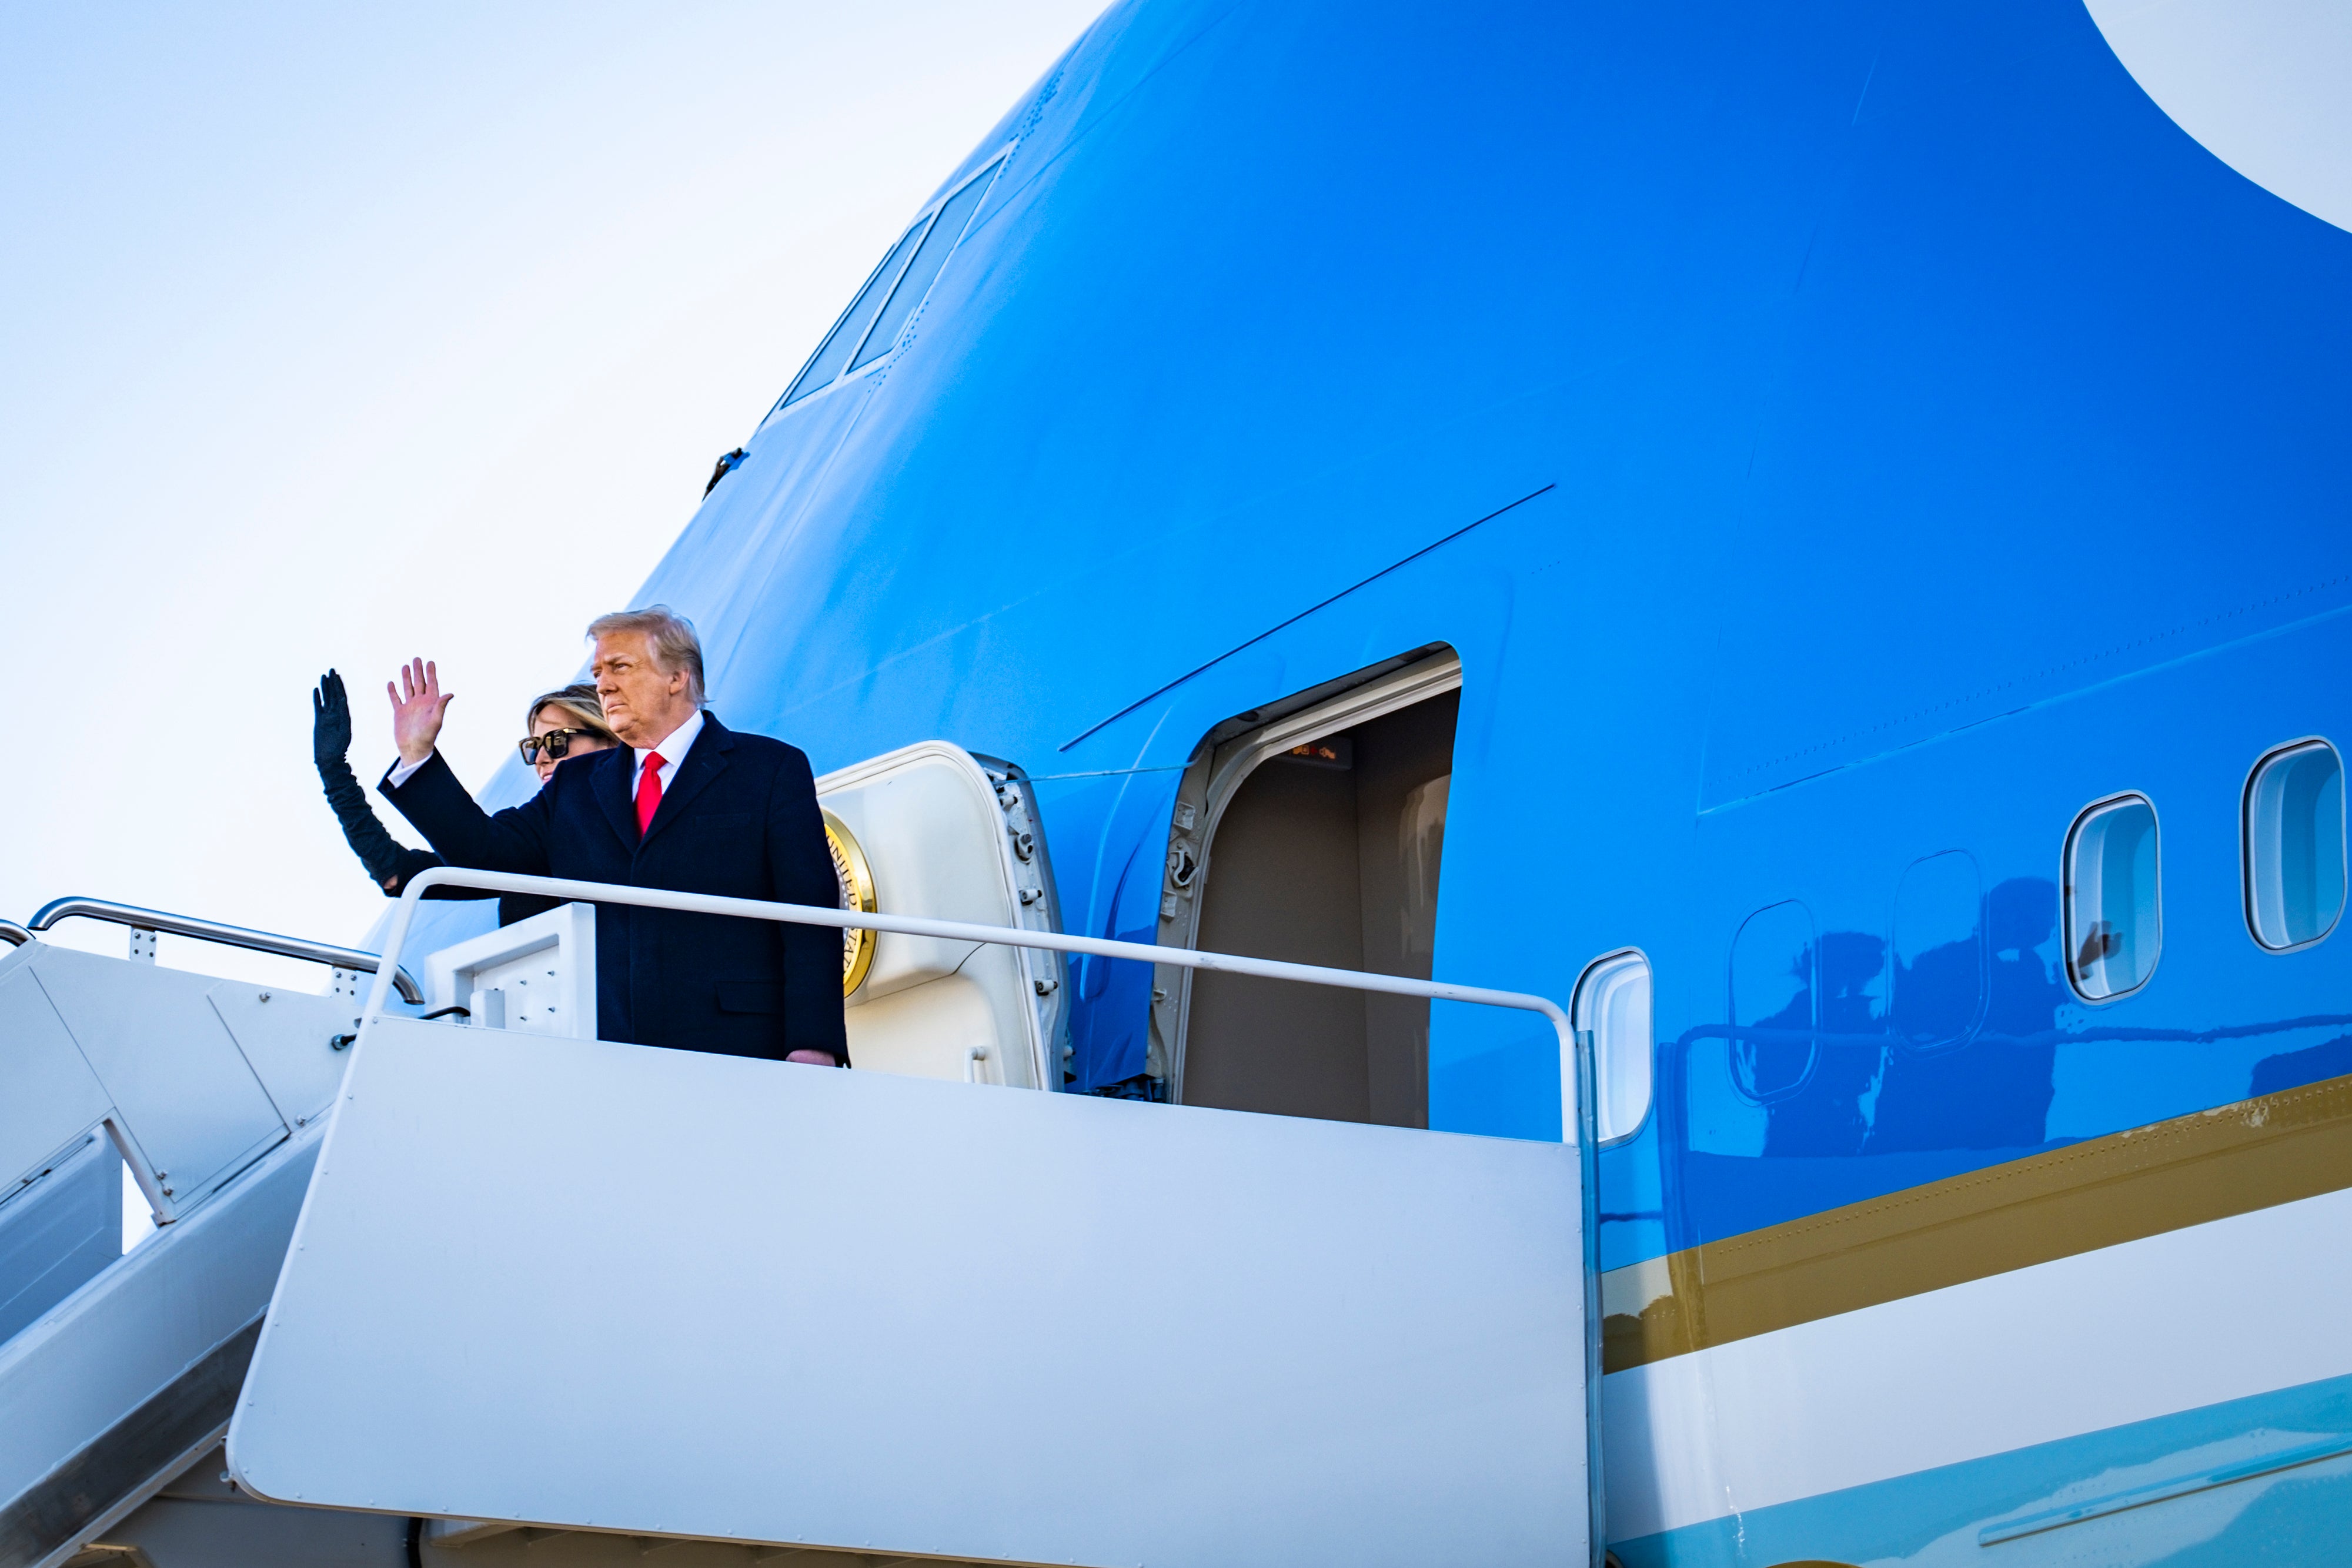 File Image: Former President Donald Trump and former First Lady Melania Trump board Air Force One at Joint Base Andrews before boarding Air Force One for his last time as President on 20 January 2021 in Joint Base Andrews, Maryland.